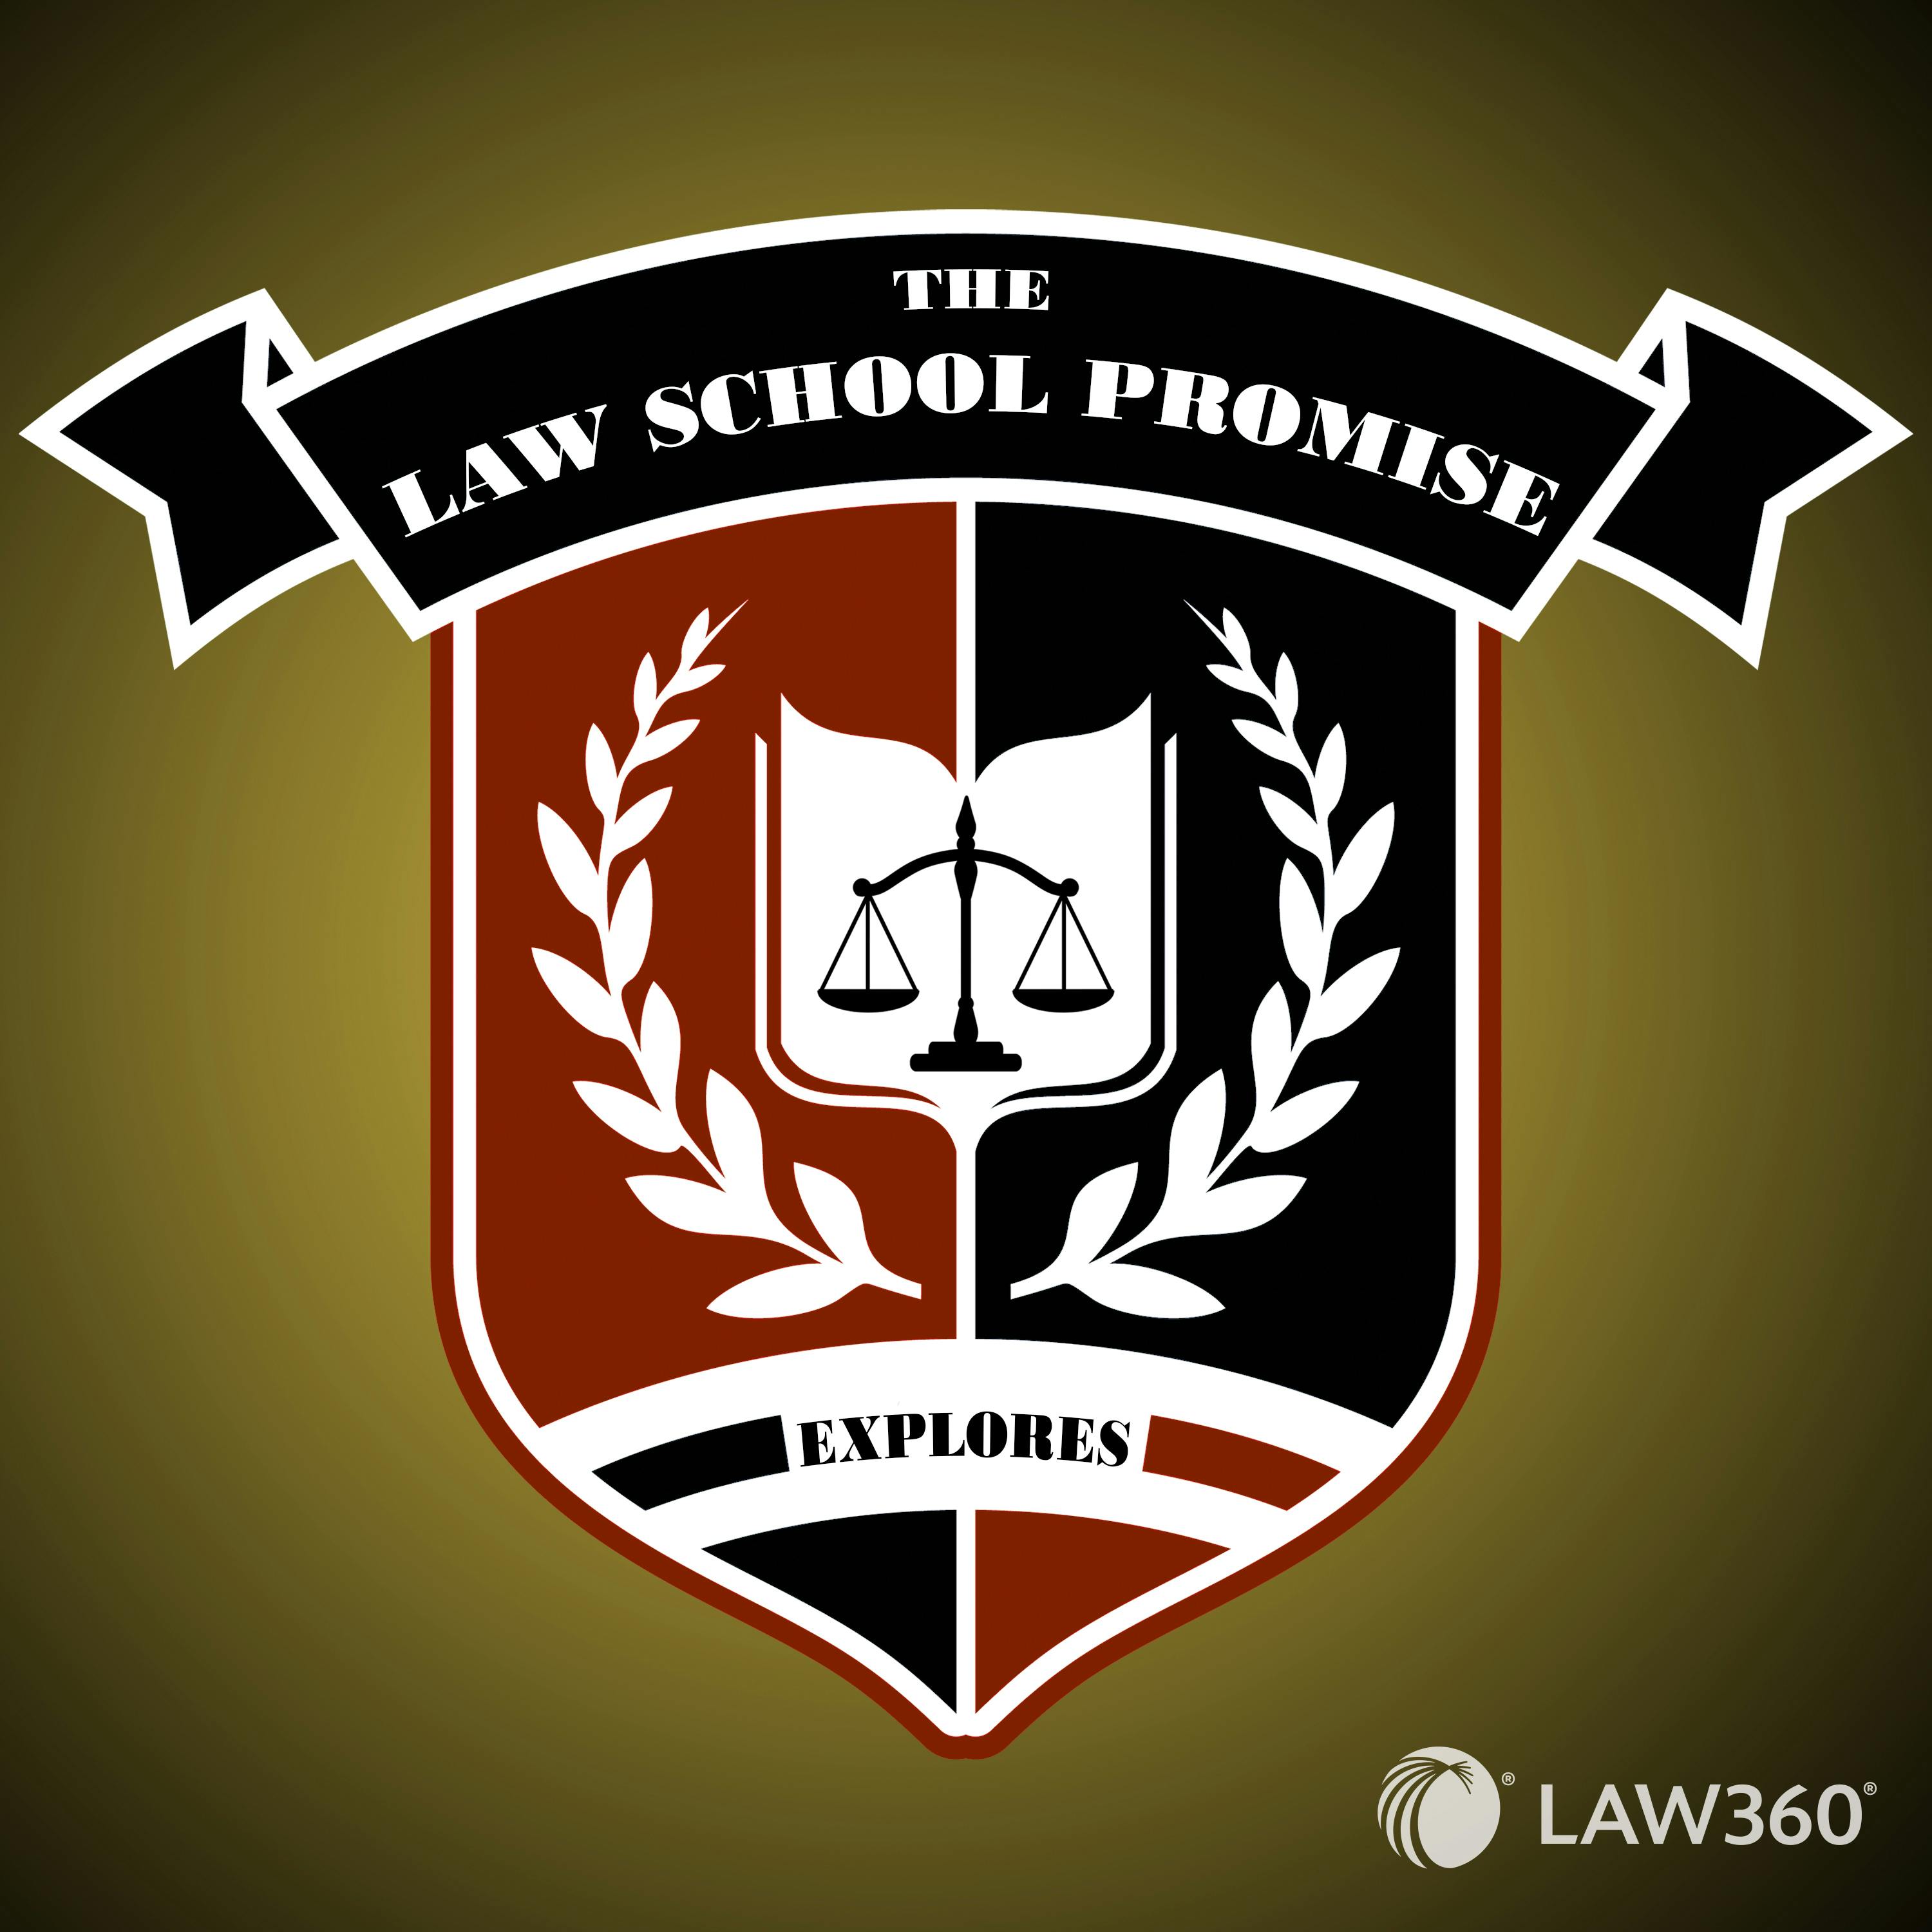 The Law School Promise Ep. 2: Does Law School Deliver?